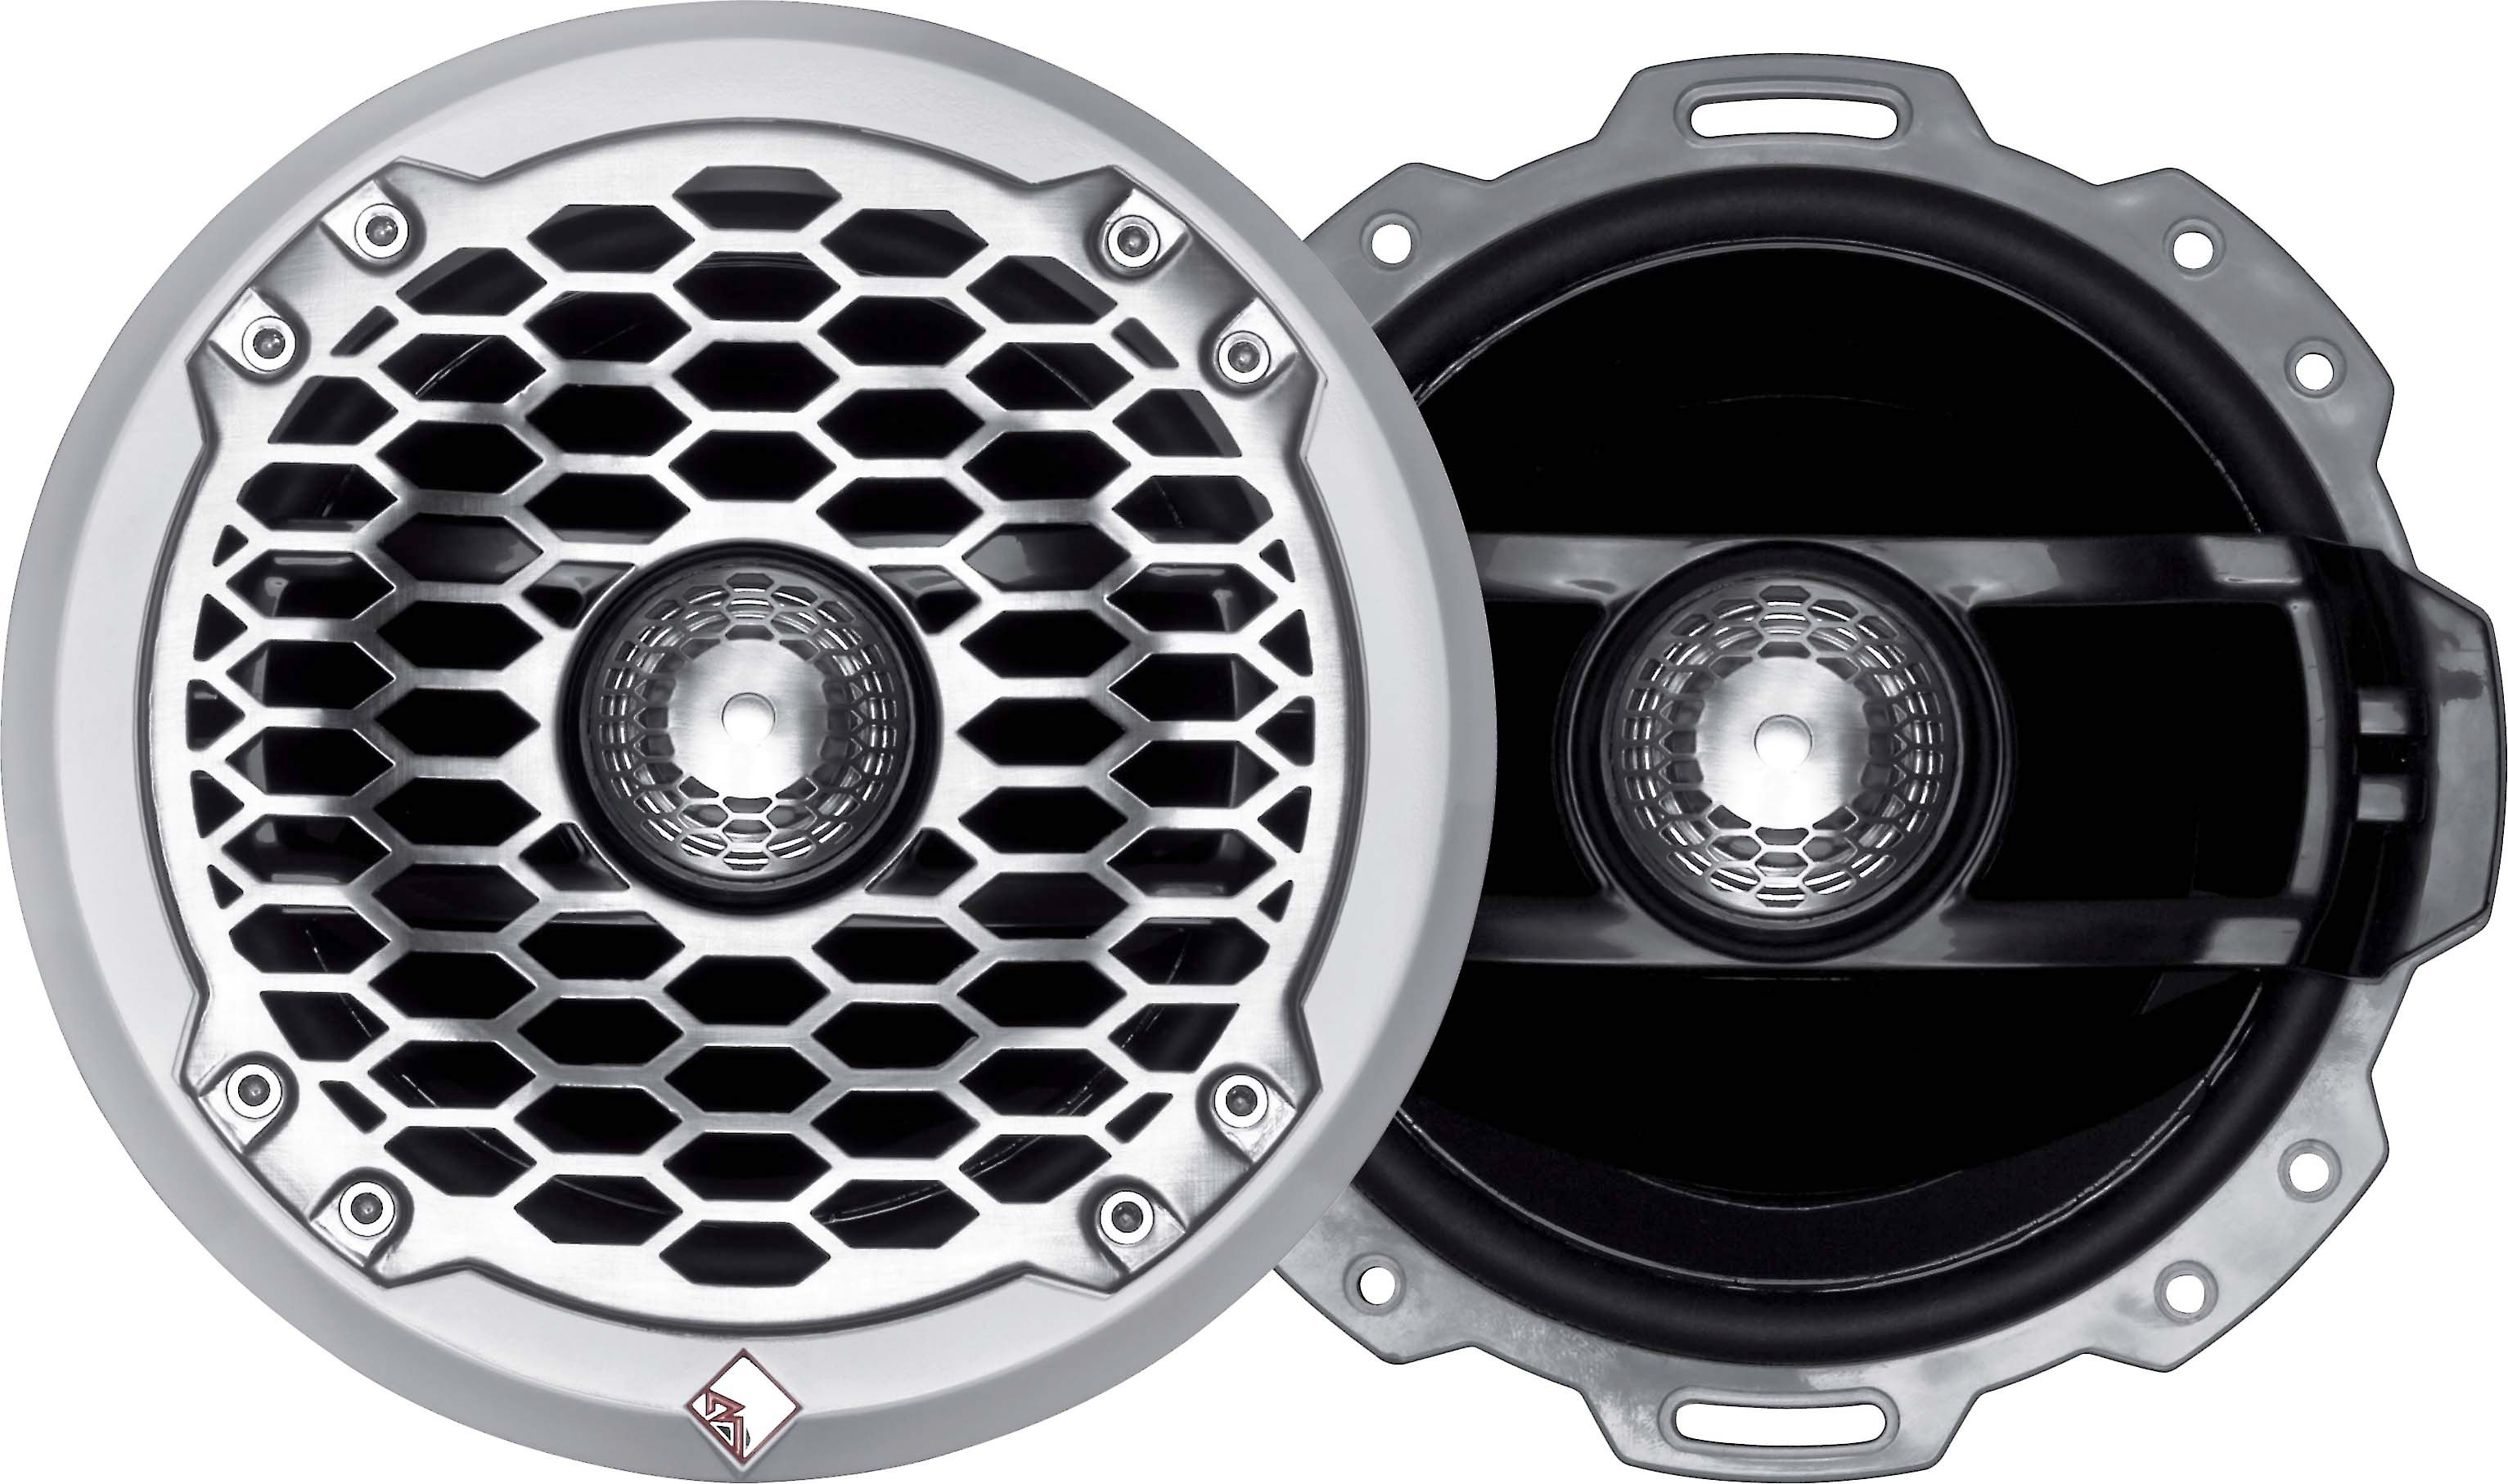 Rockford Fosgate PM262 Punch Series 6 quot 2 way marine speakers at Crutchfield